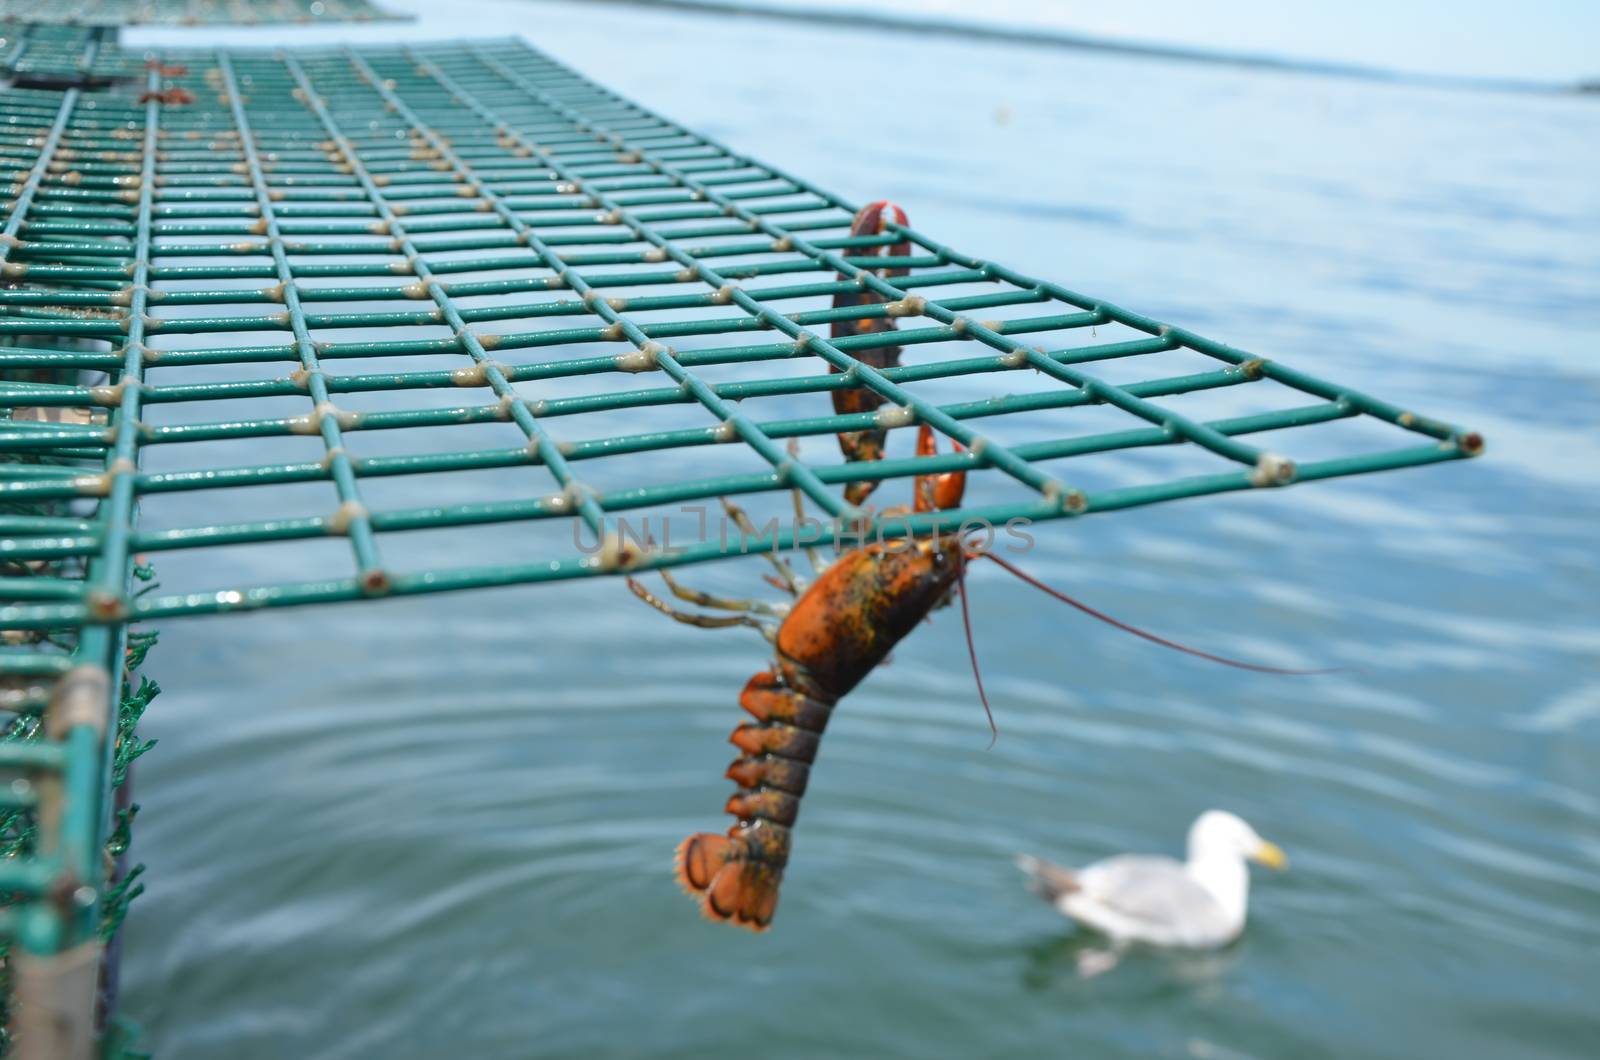 Lobster haging from a trap before being dropped back into the sea. The lobster was too small to keep.